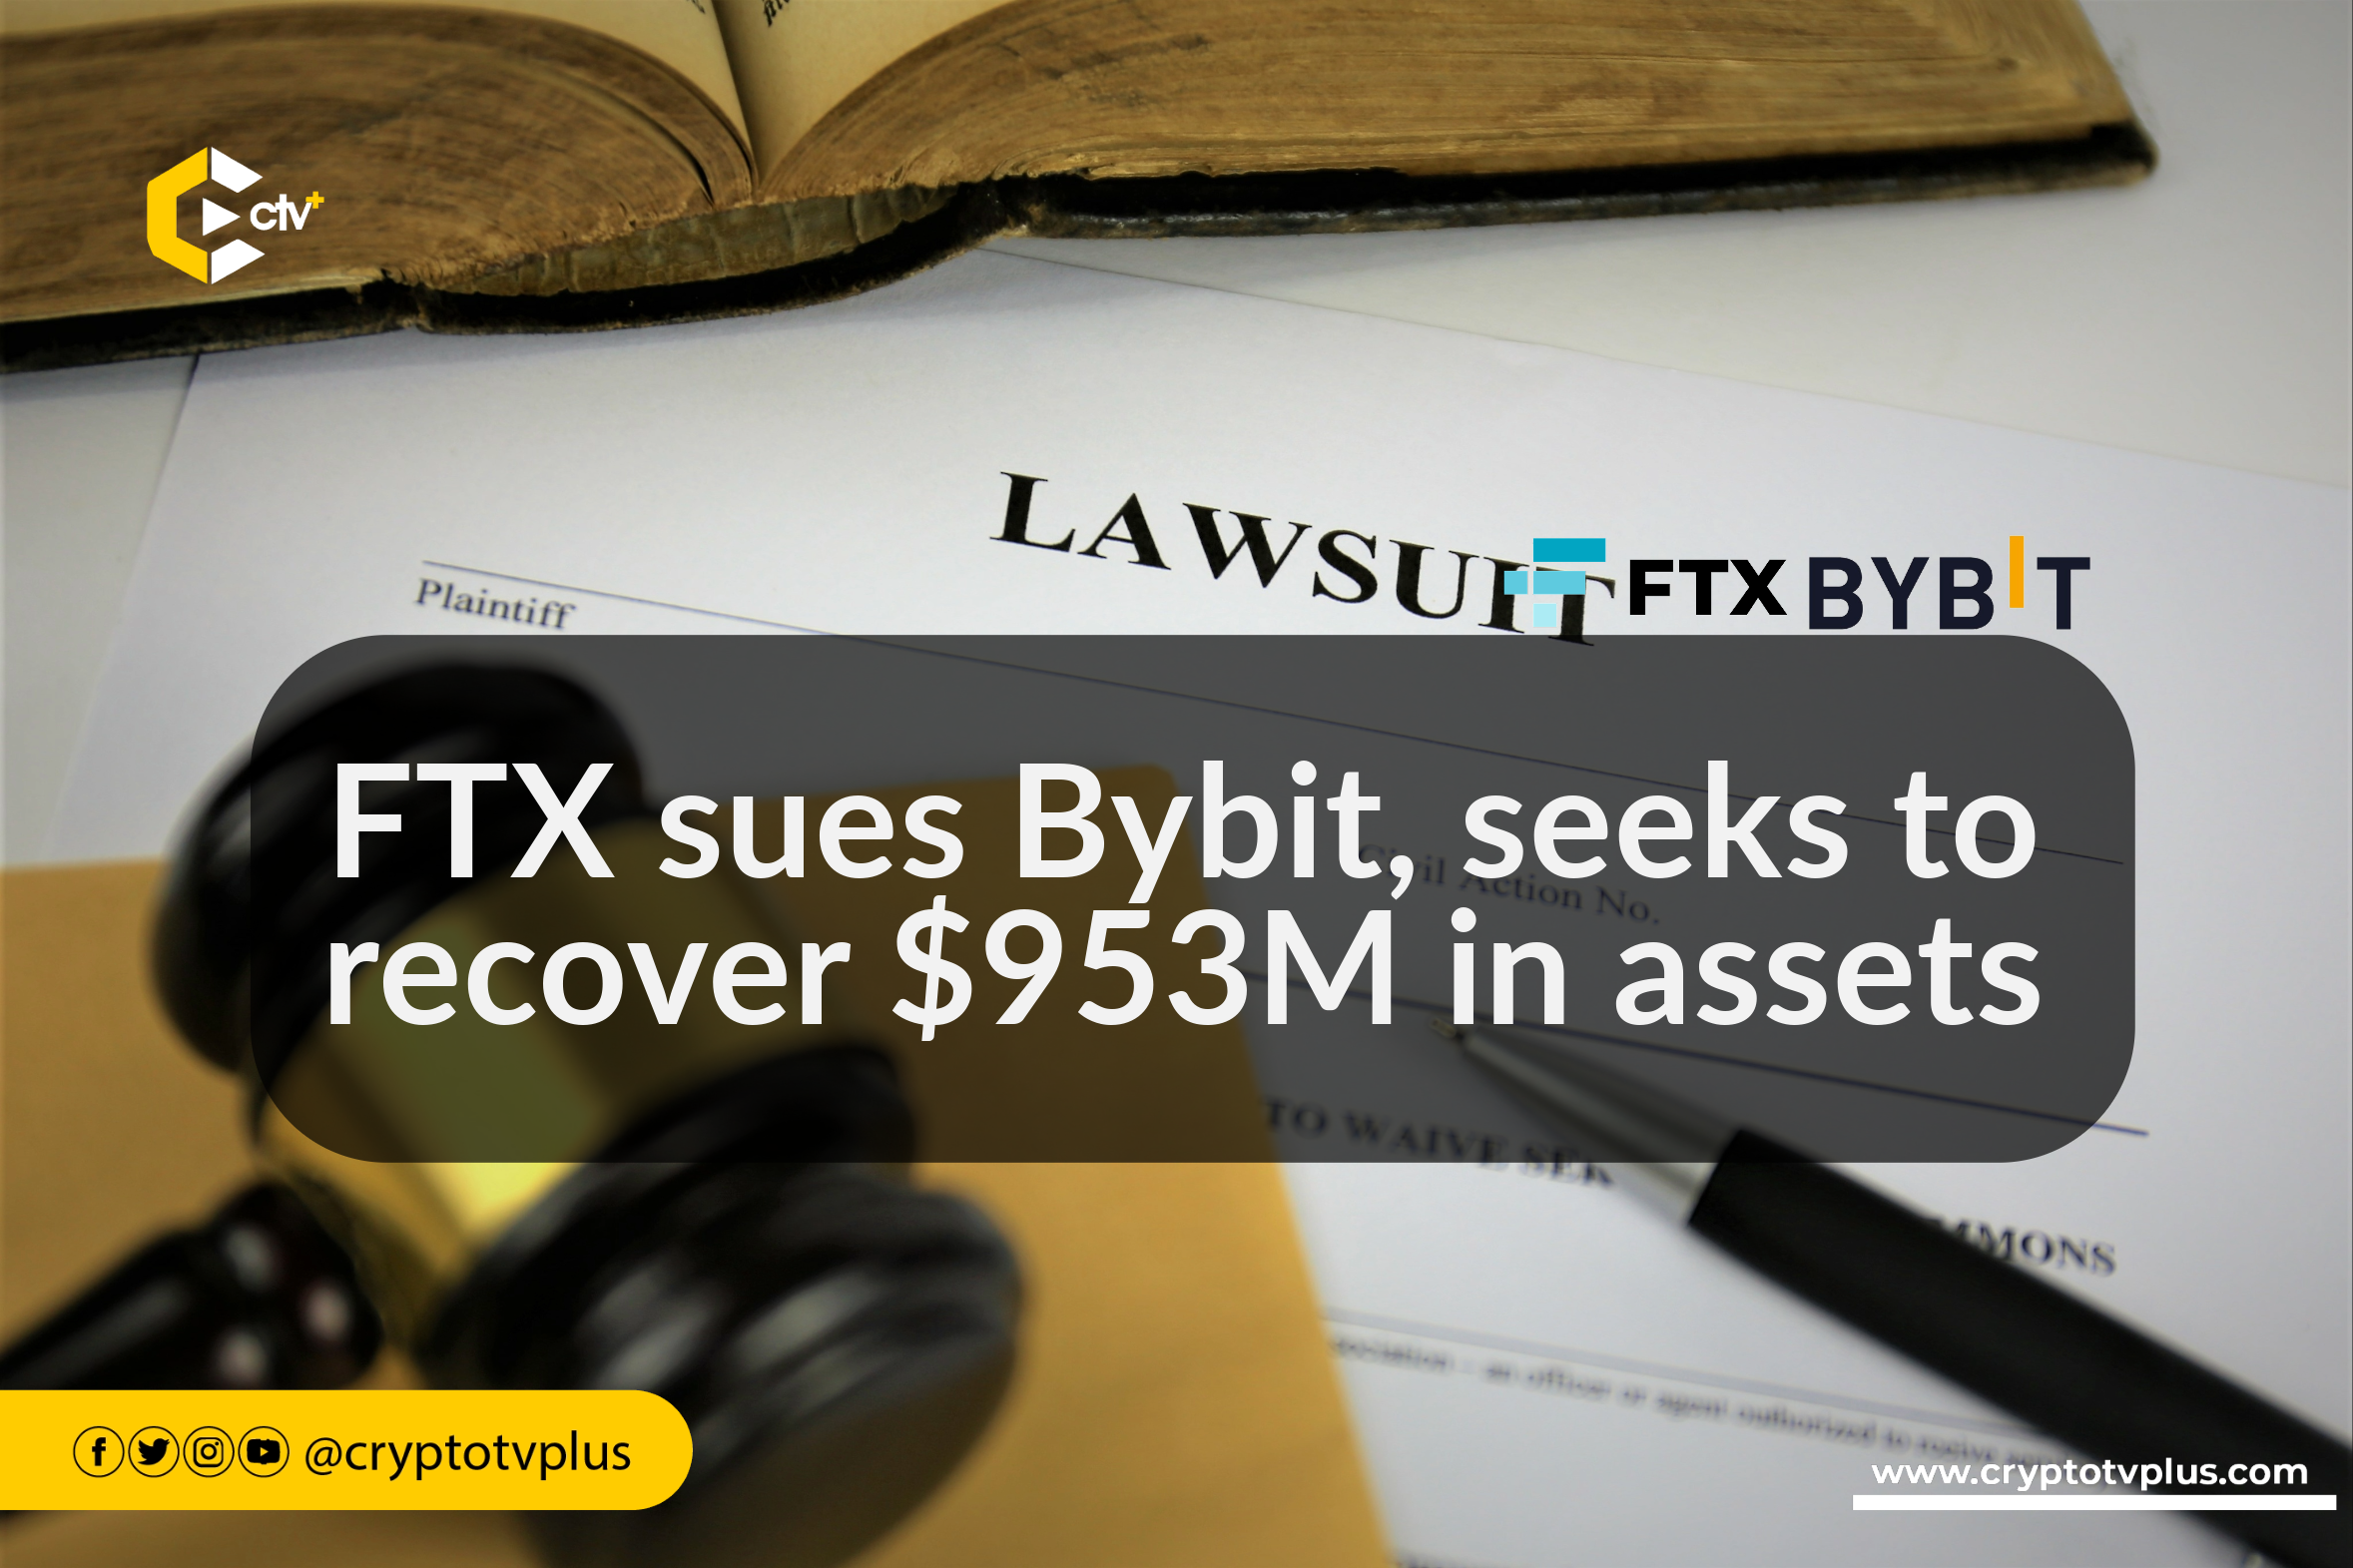 FTX lawsuit alleges misuse of "VIP" status by Bybit's affiliate, Mirana, leading to $327M in withdrawal. It seeks to reclaim $953 million in cash & digital assets.